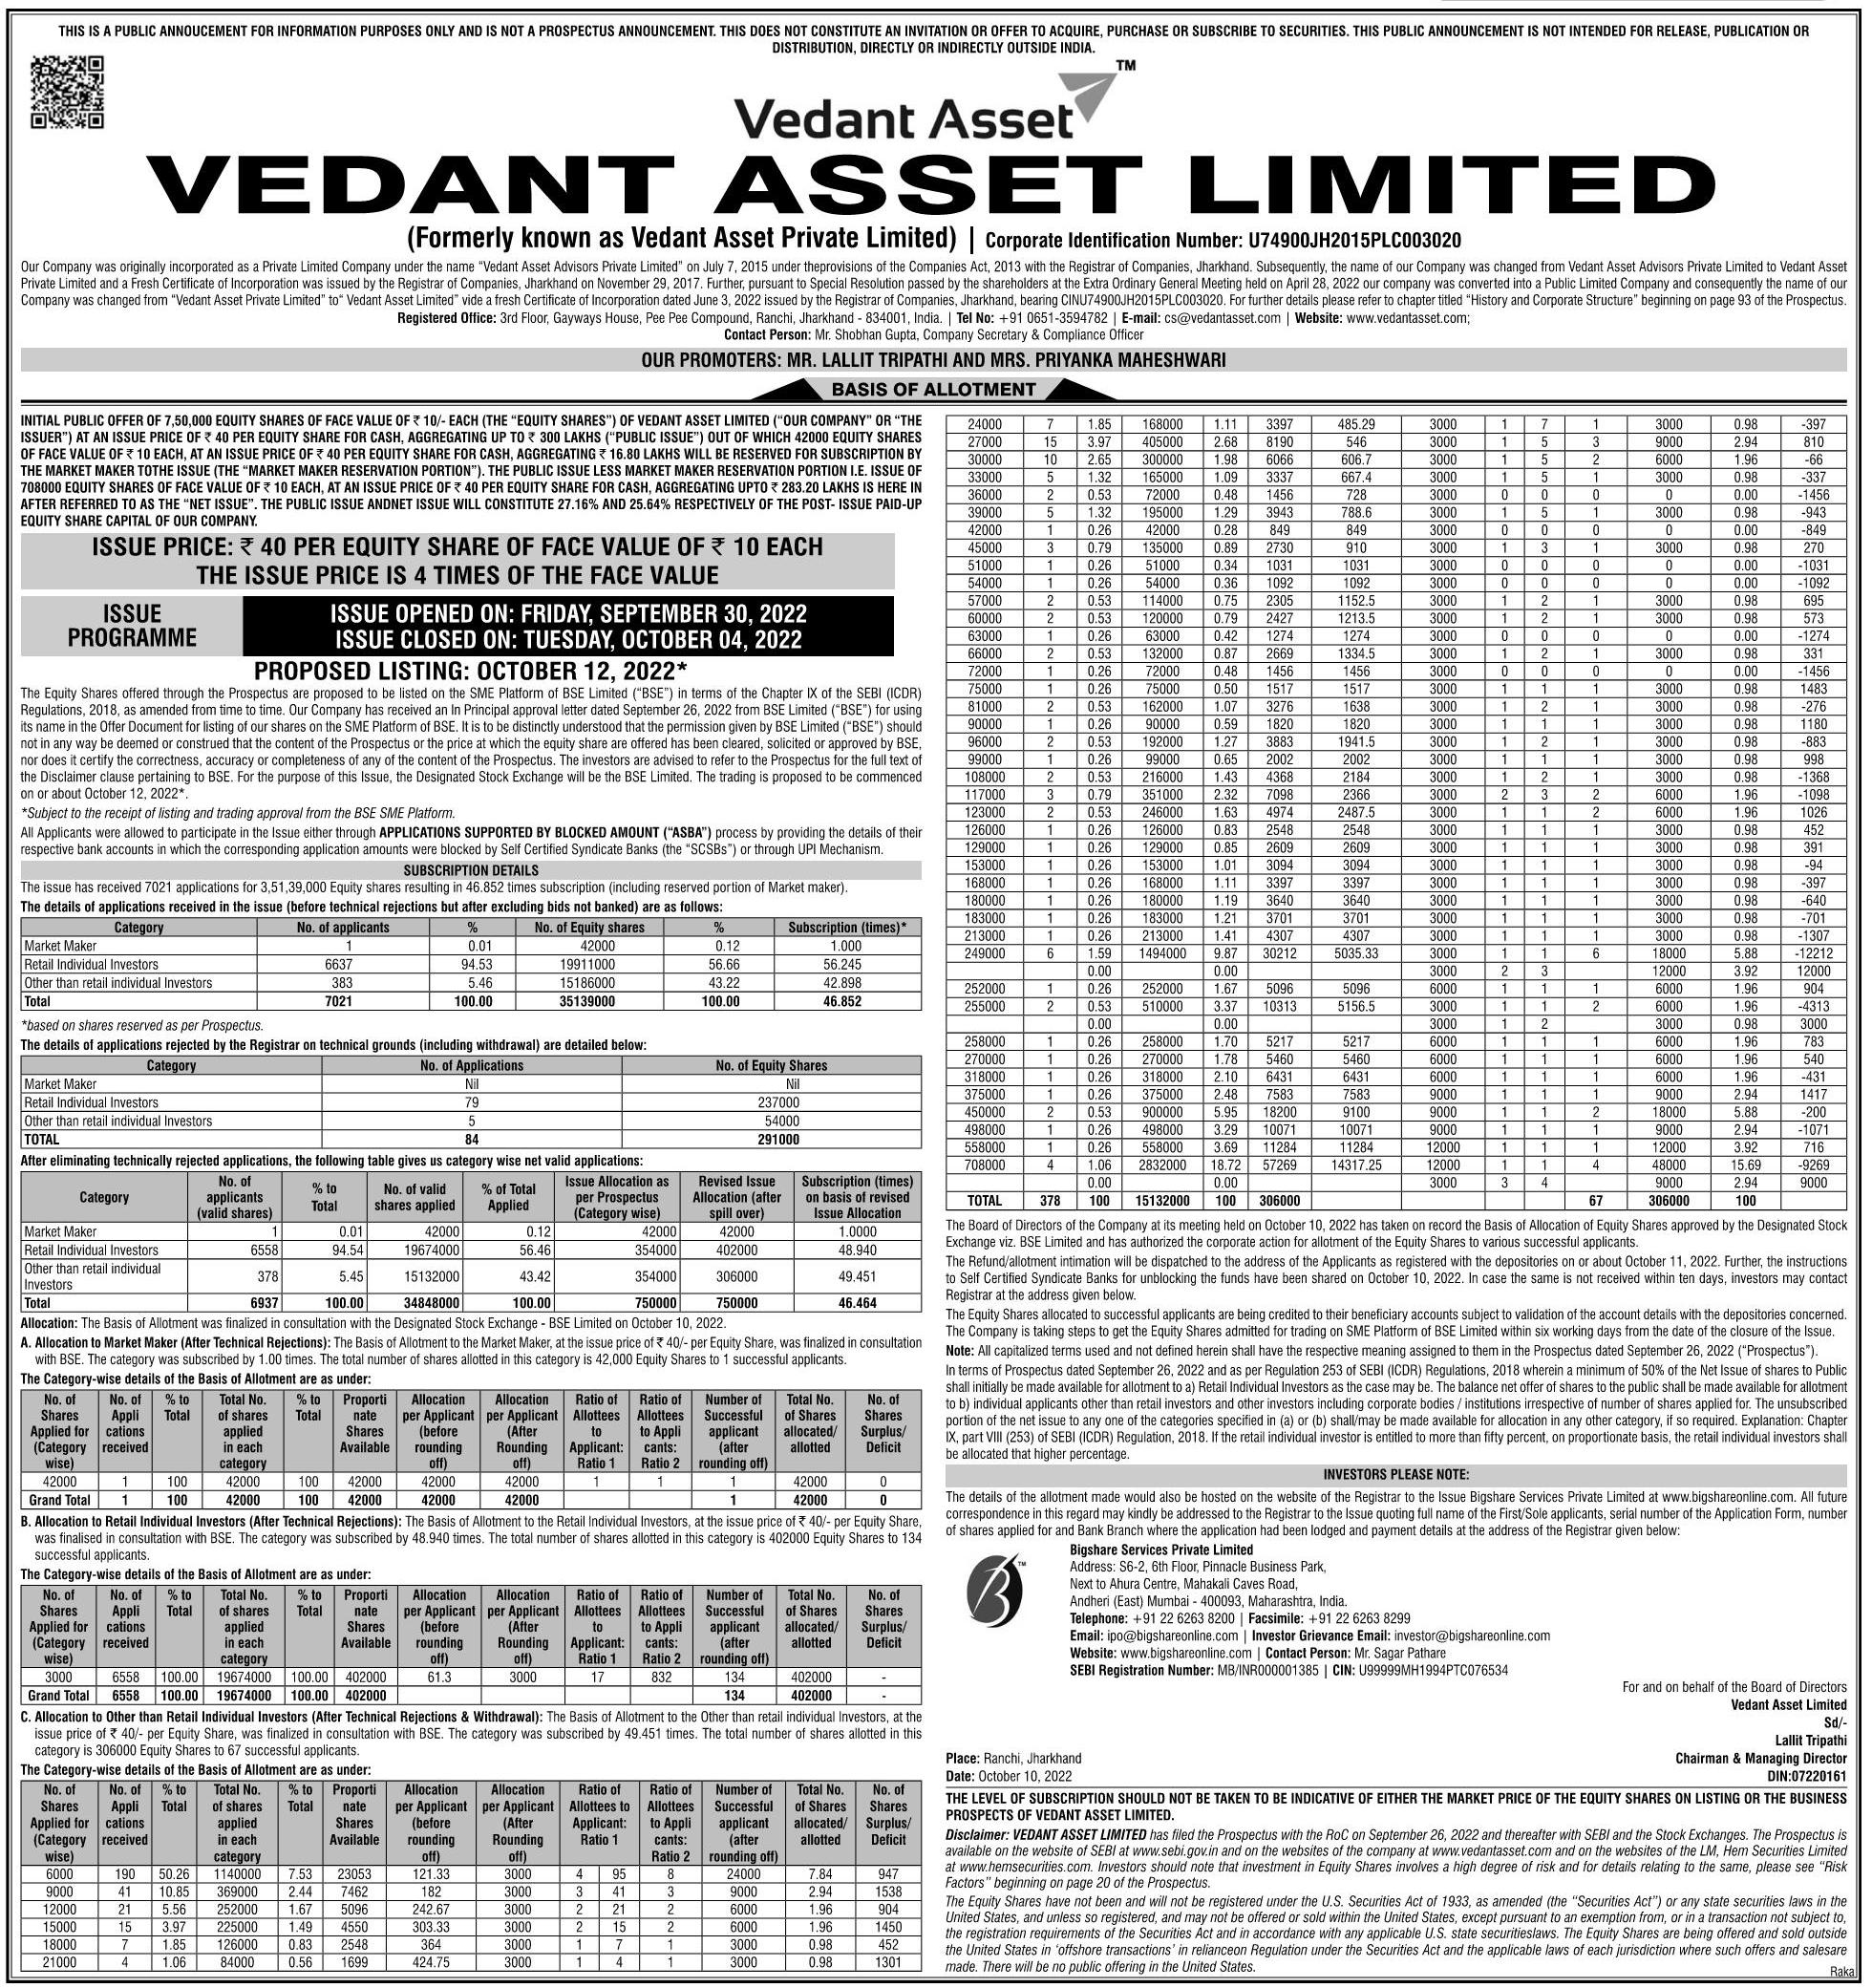 Vedant Asset Limited IPO Basis of Allotment